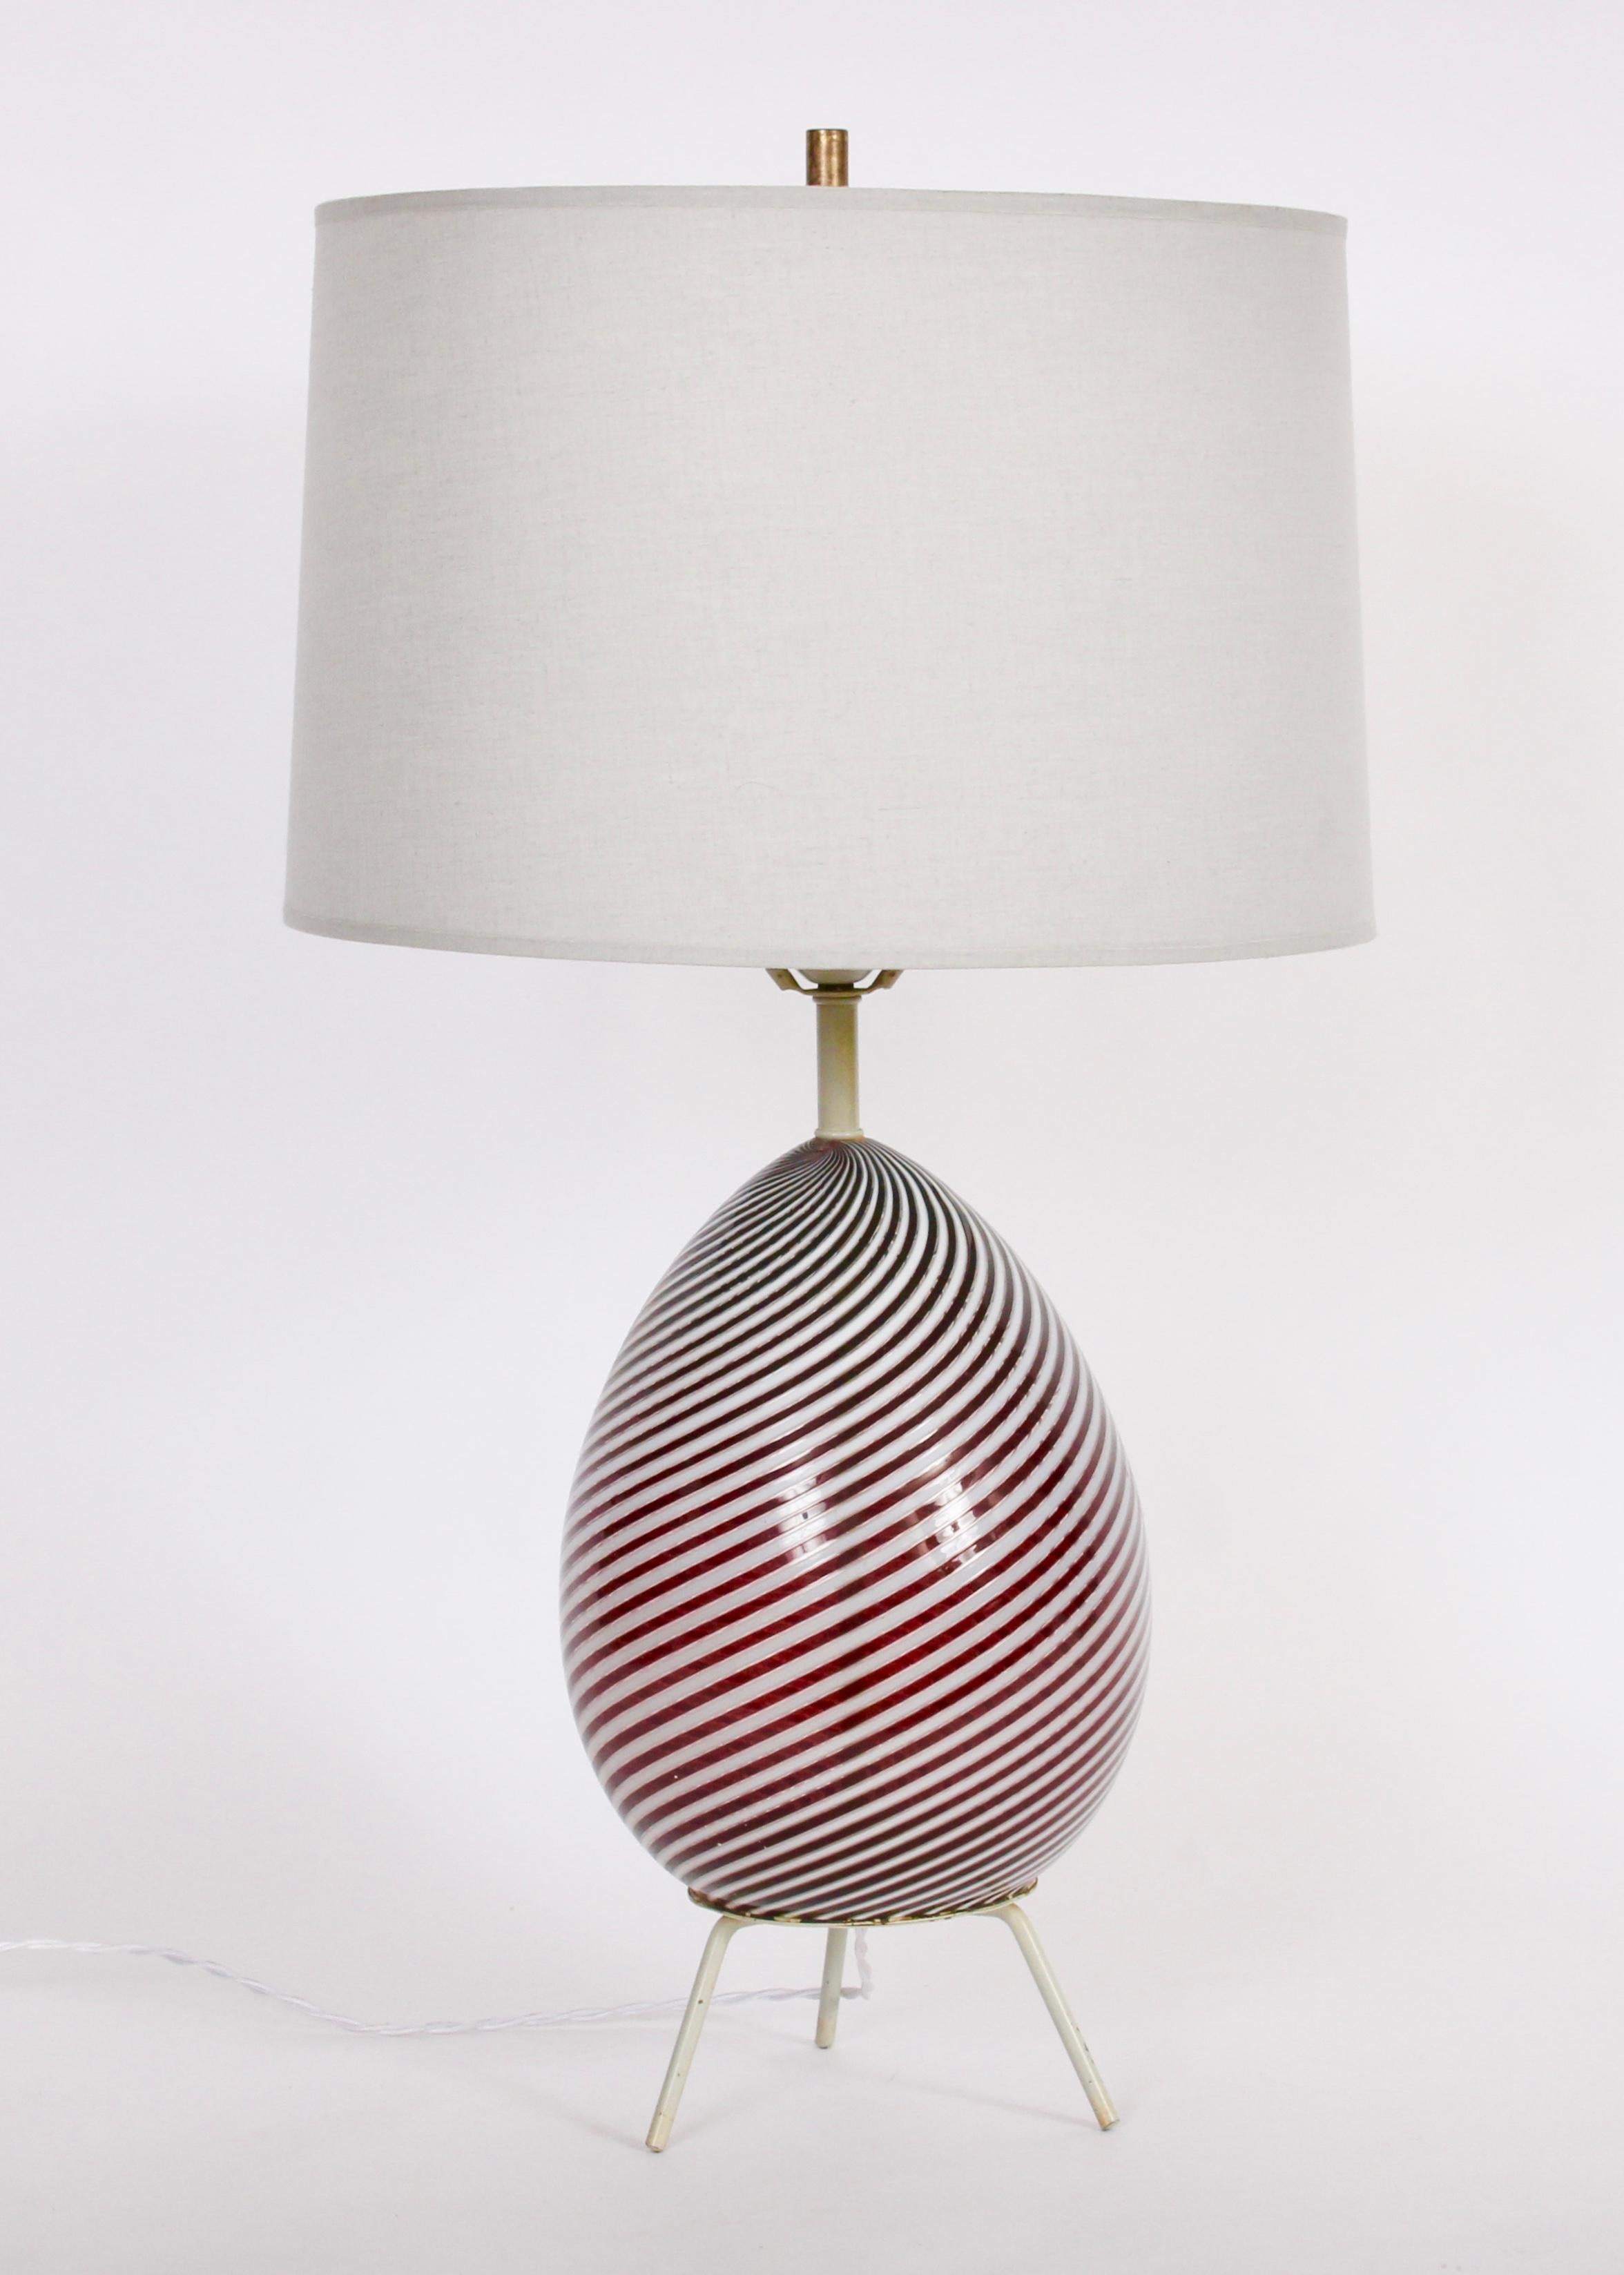 Dino Martens for Aureliano Toso deep cranberry and opaque white swirl Murano Glass Table Lamp, 1960s.  Featuring a handcrafted egg form in translucent glass with parallel diagonal stripes in cranberry and white with original Taupe enameled hardware